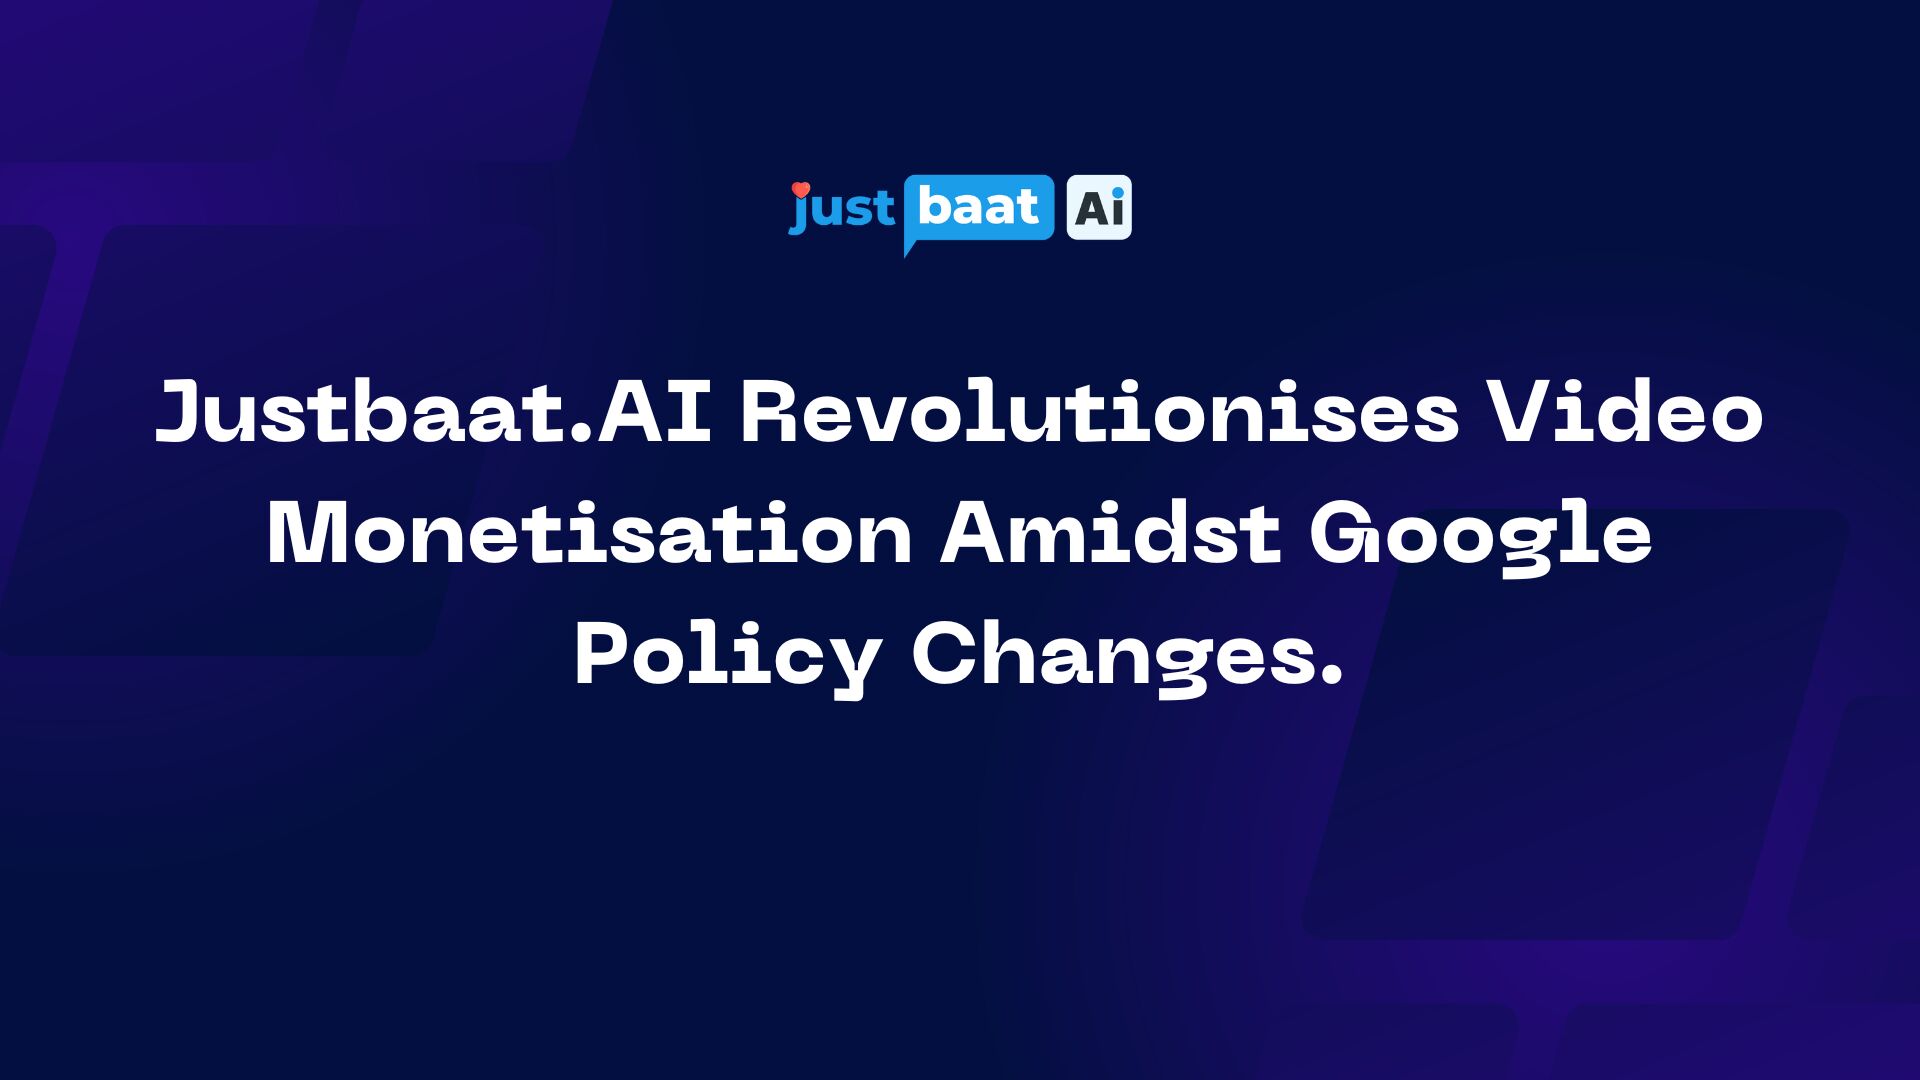 Justbaat.AI Revolutionises Video Monetisation Amidst Google Policy Changes